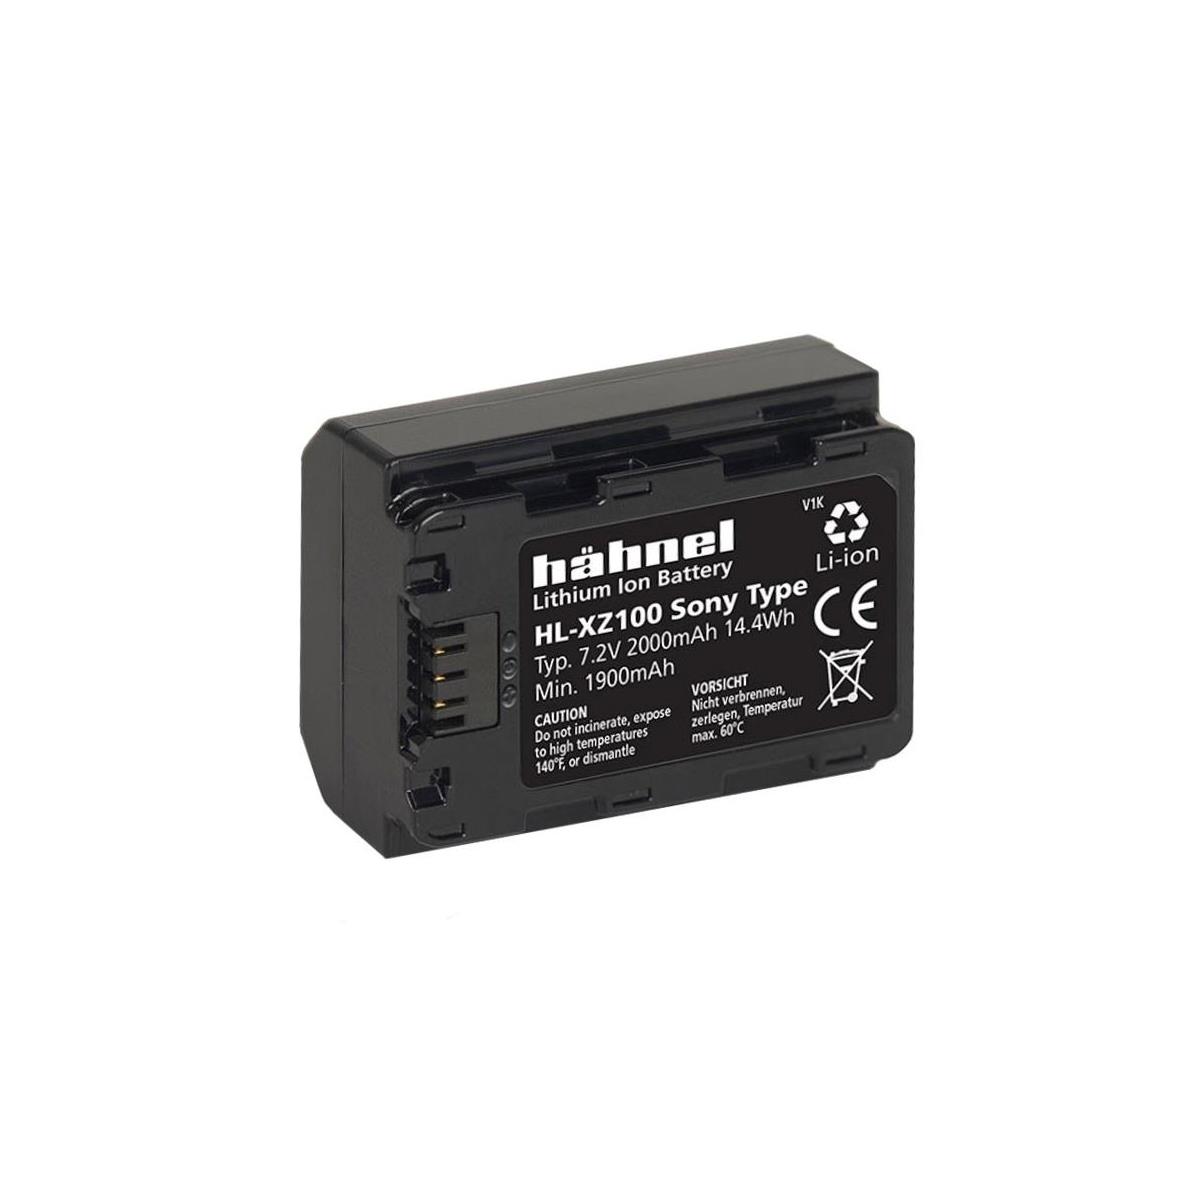 Image of Hahnel 2000mAh 7.2V Replacement Lithium Ion Battery for Sony Digital Cameras